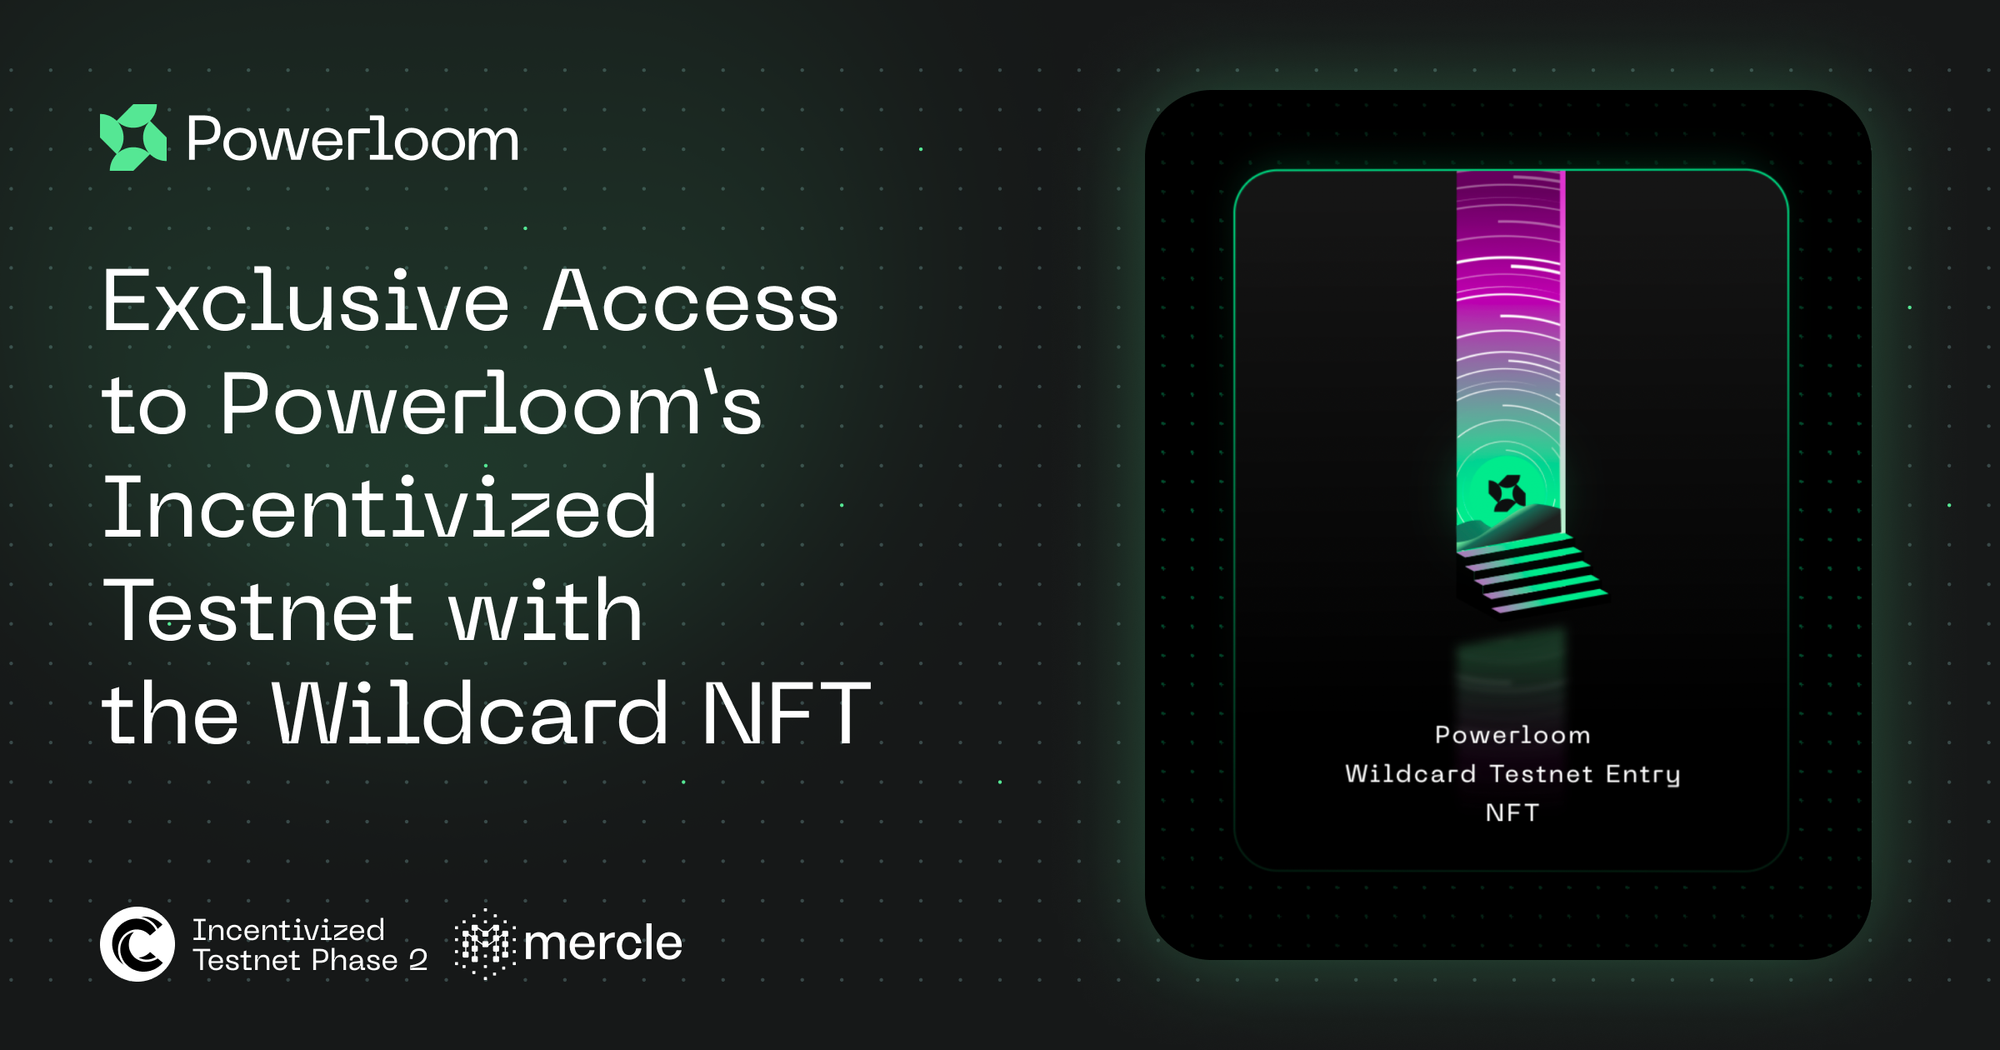 Exclusive Access to Powerloom’s Incentivized Testnet with the Wildcard NFT